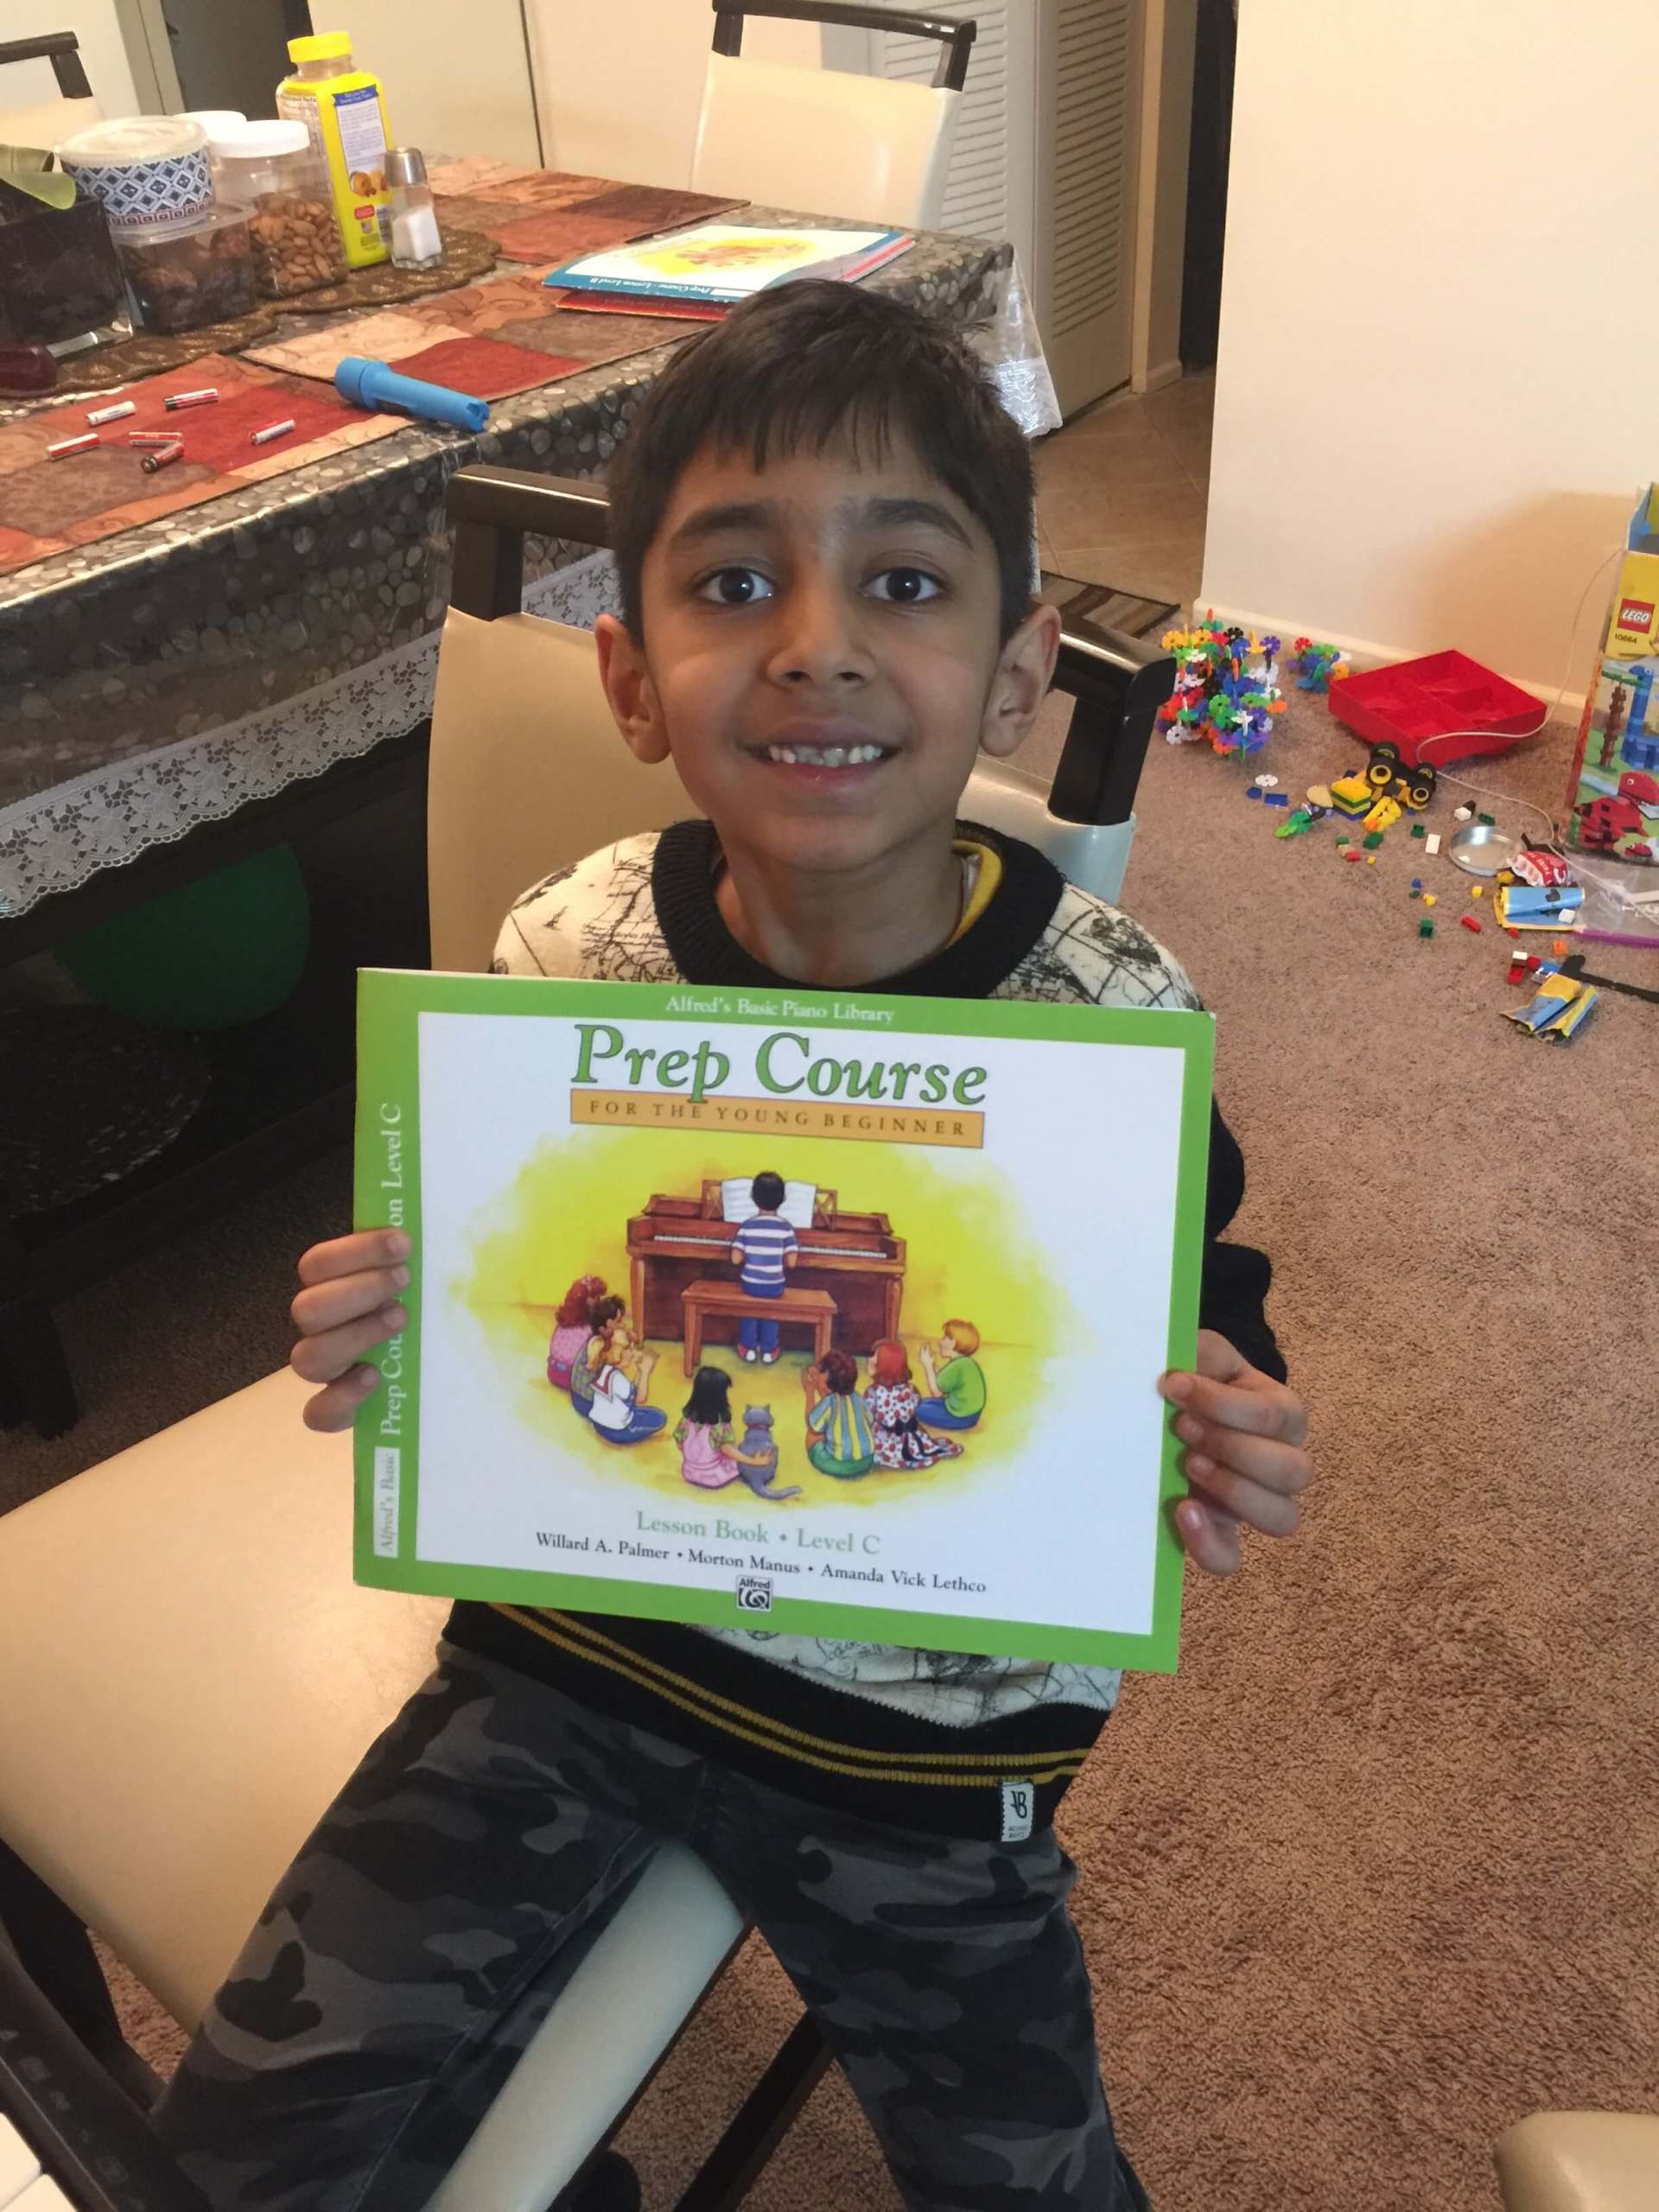 Kid Holding Prep Course Book — A Plus In Home Guitar Lessons — Arlighton Heights, IL